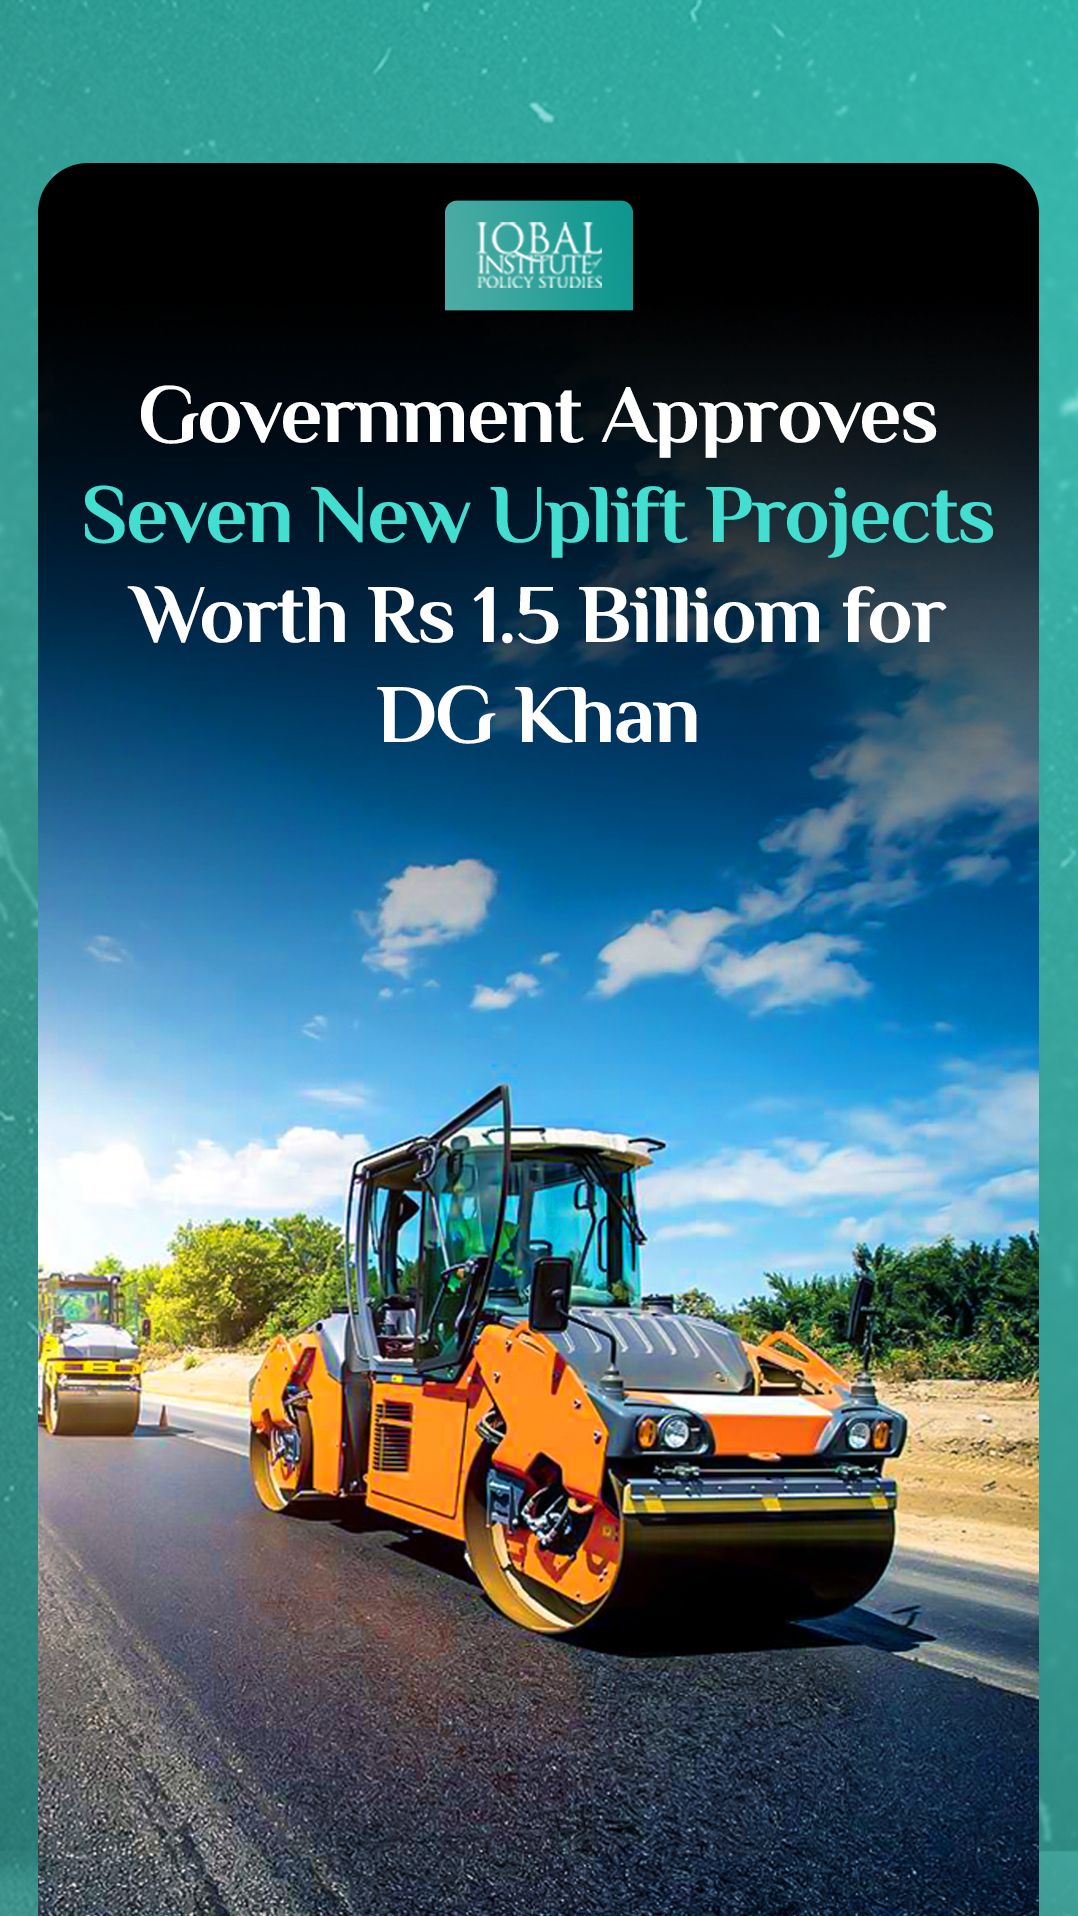 Government approves seven new uplift projects worth Rs 1.5b for DG Khan